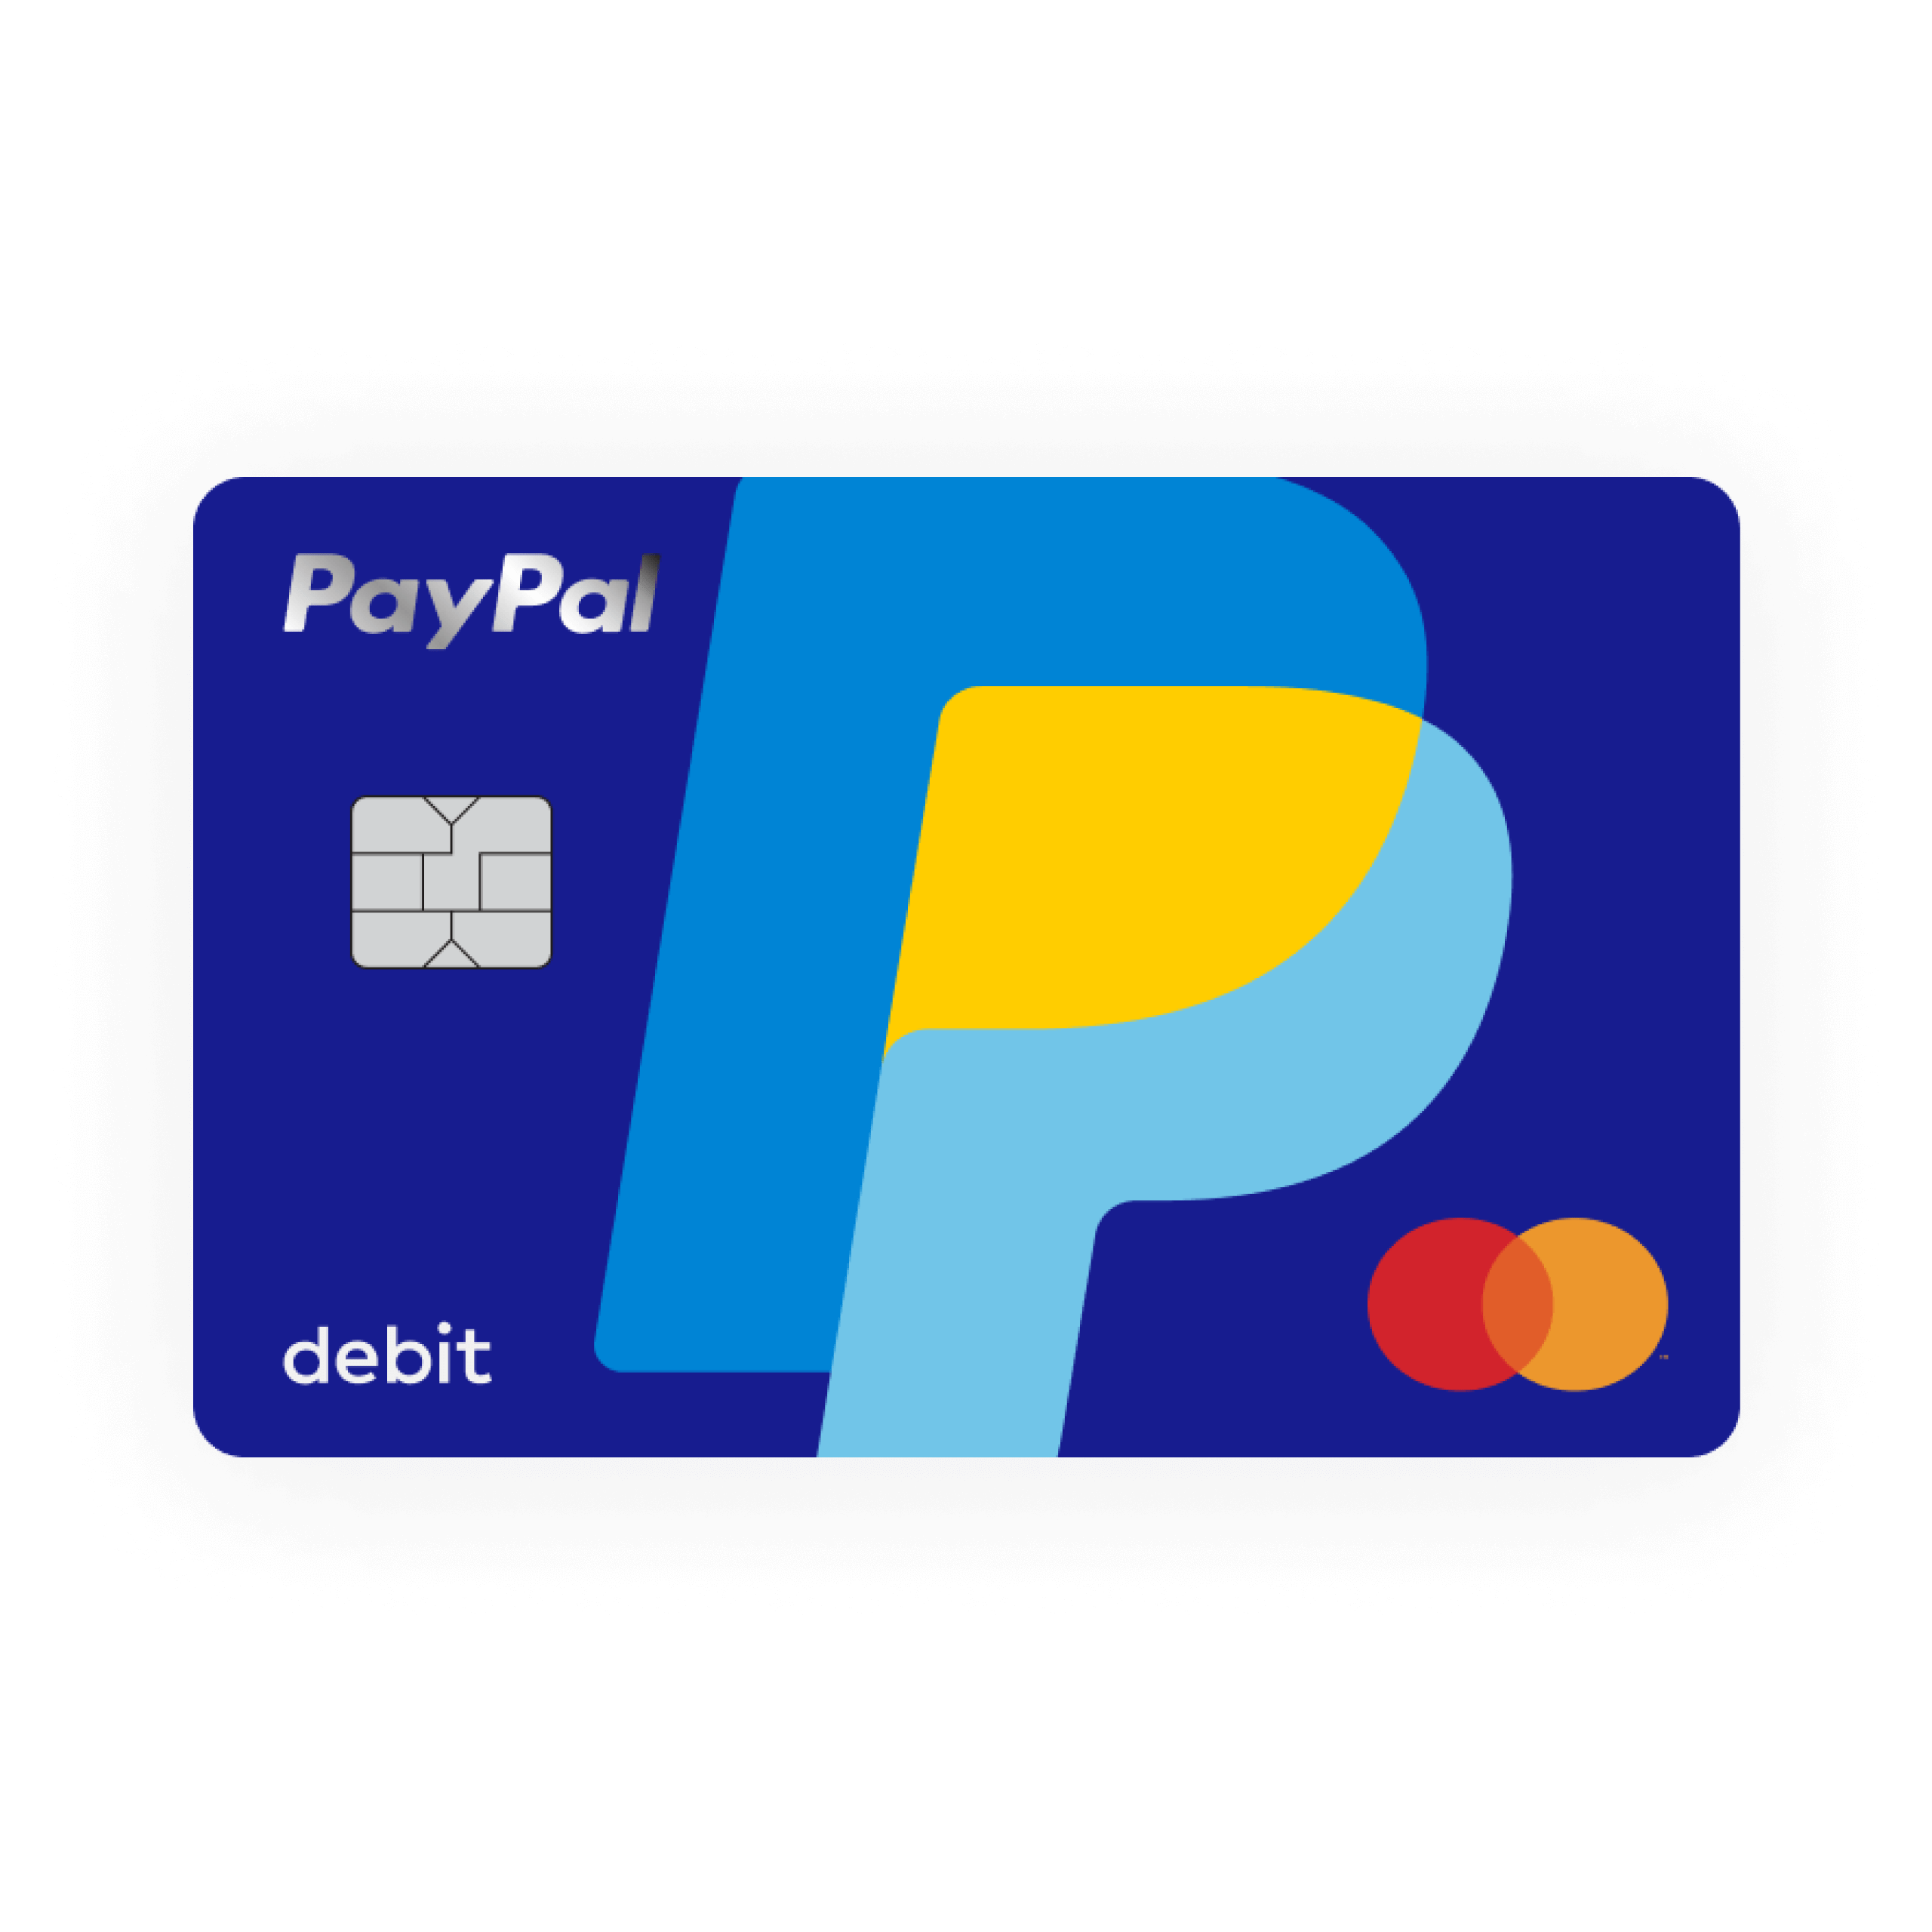 https://www.paypalobjects.com/marketing/web/US/en/rebrand/Manage-your-money/Manage-your-money%20MAIN/manage-money-main--split--paypal-cash-card--ratio=1-1--for=all_v2.png